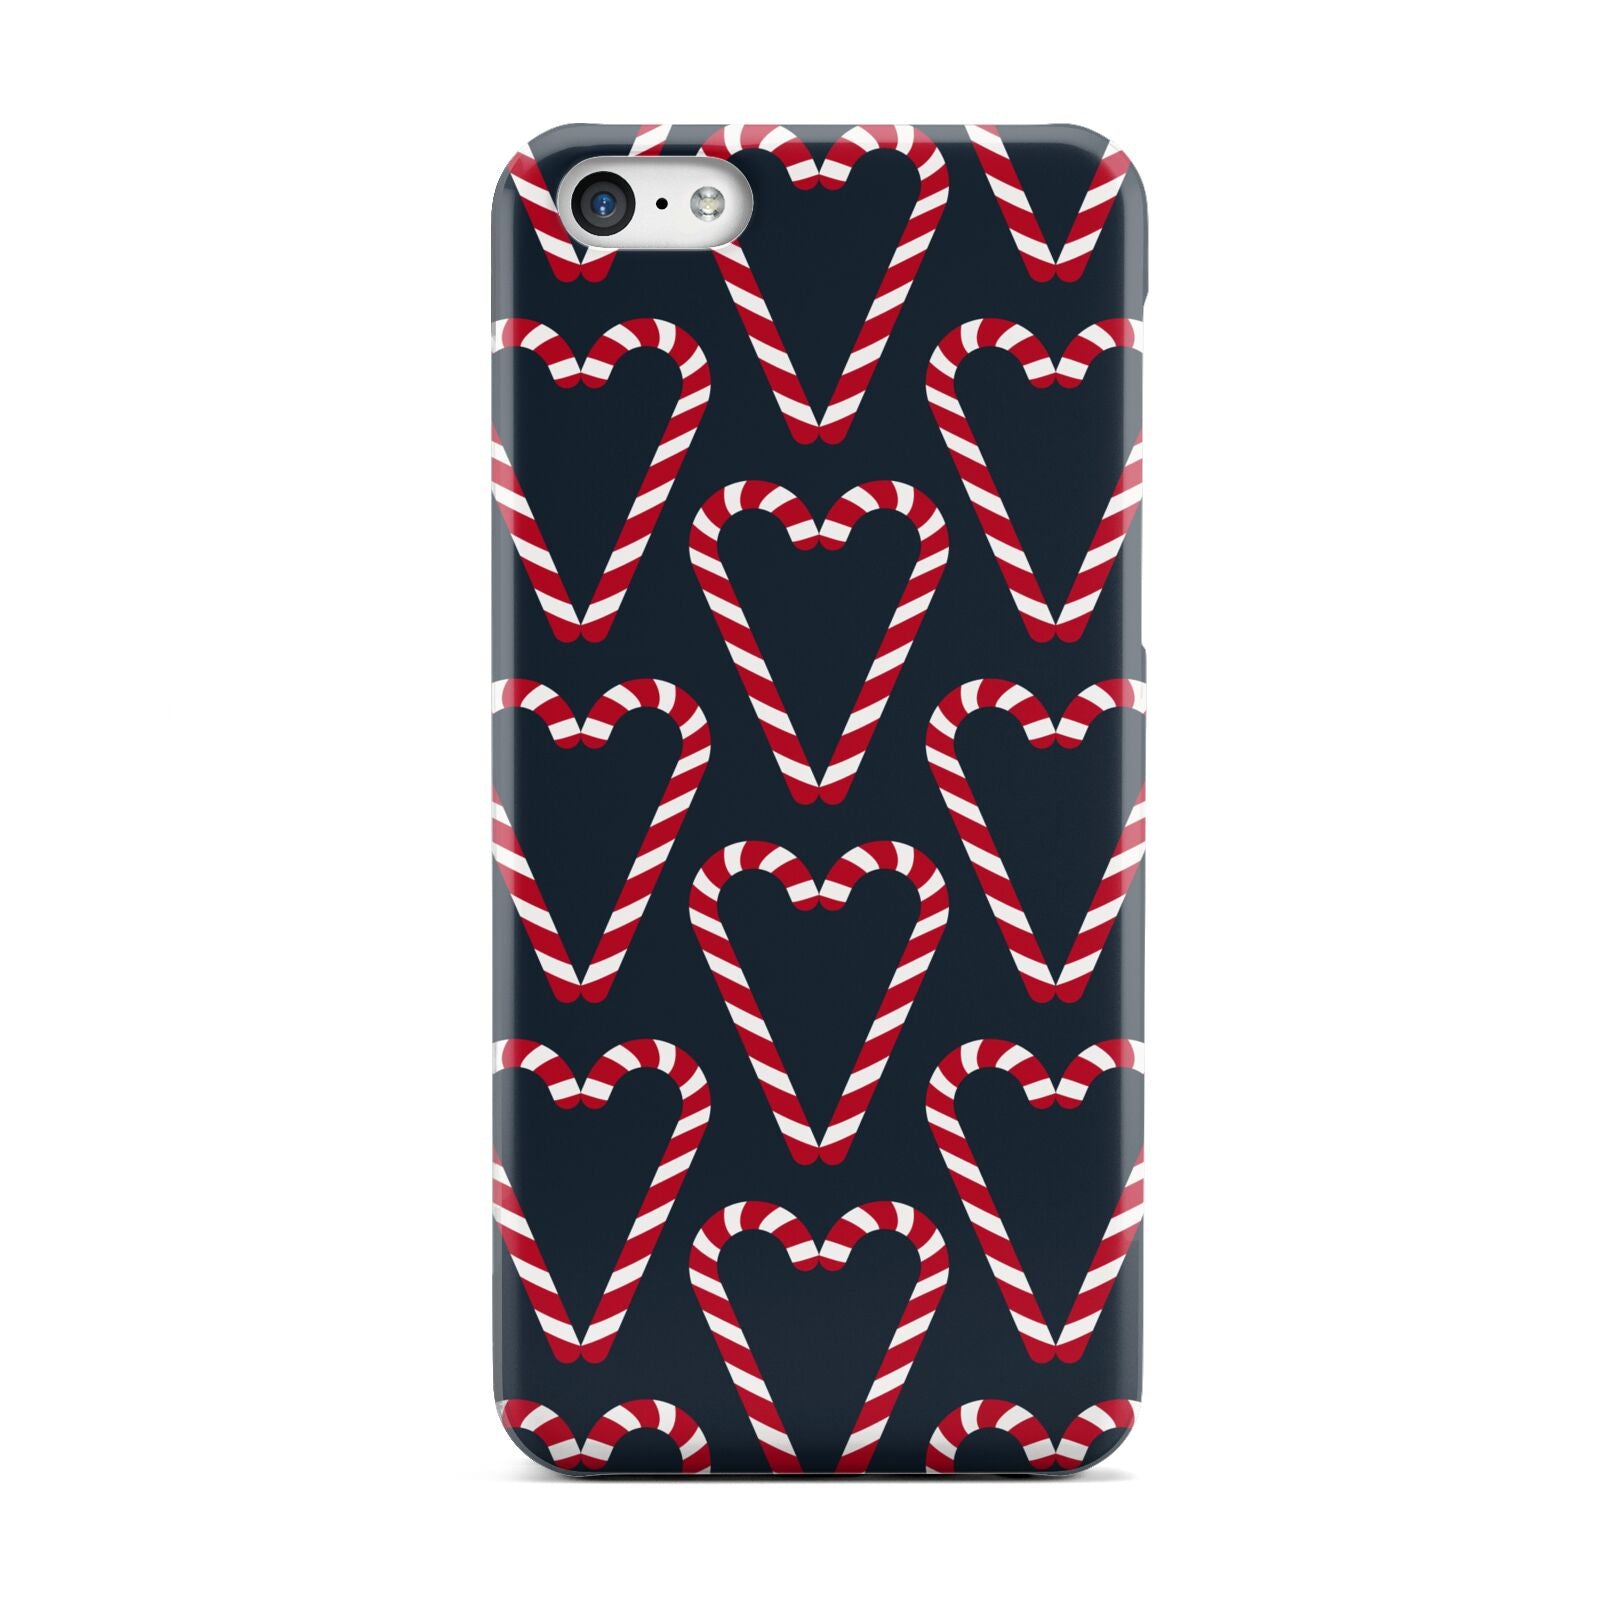 Candy Cane Pattern Apple iPhone 5c Case